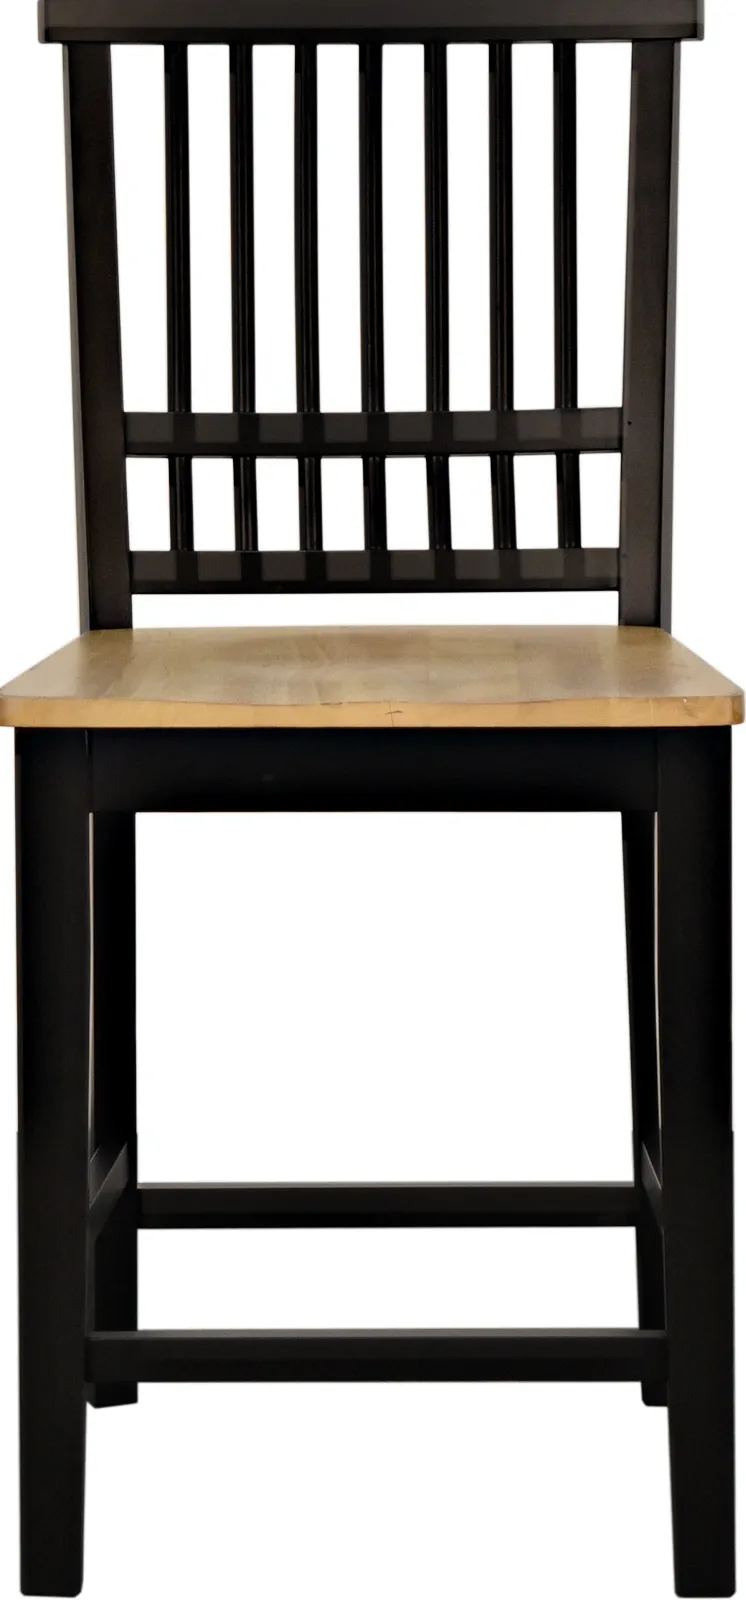 Crawford Street EMERSON COUNTER STOOL